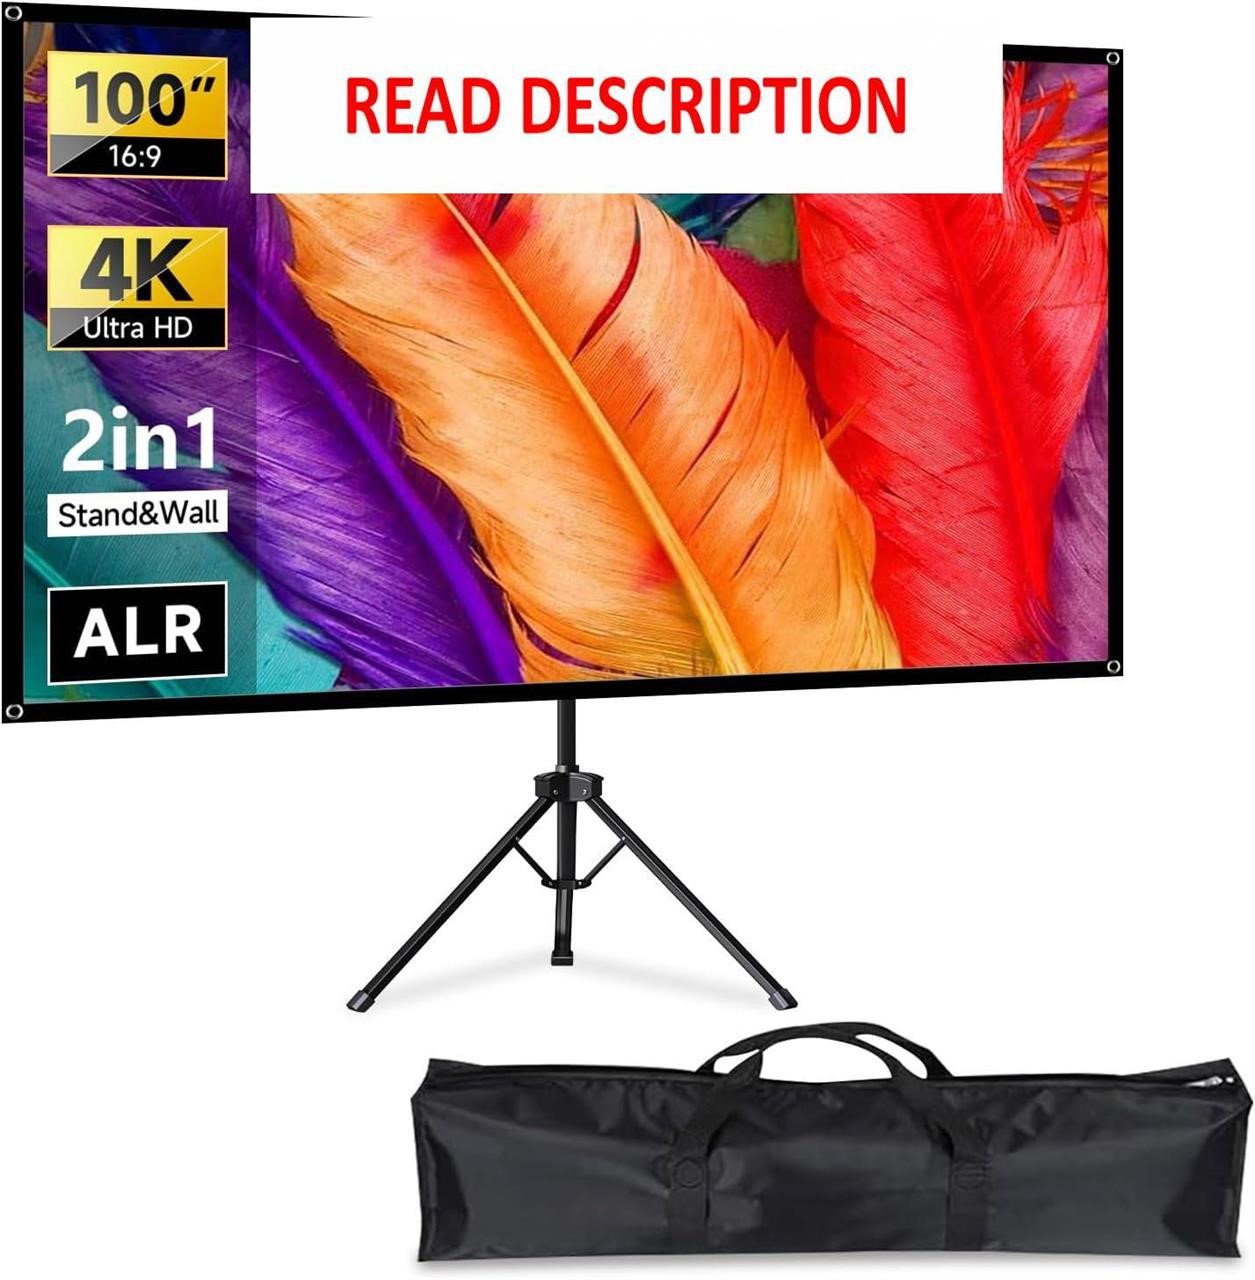 IN&VI ALR Projector Screen with Stand  100 Inch